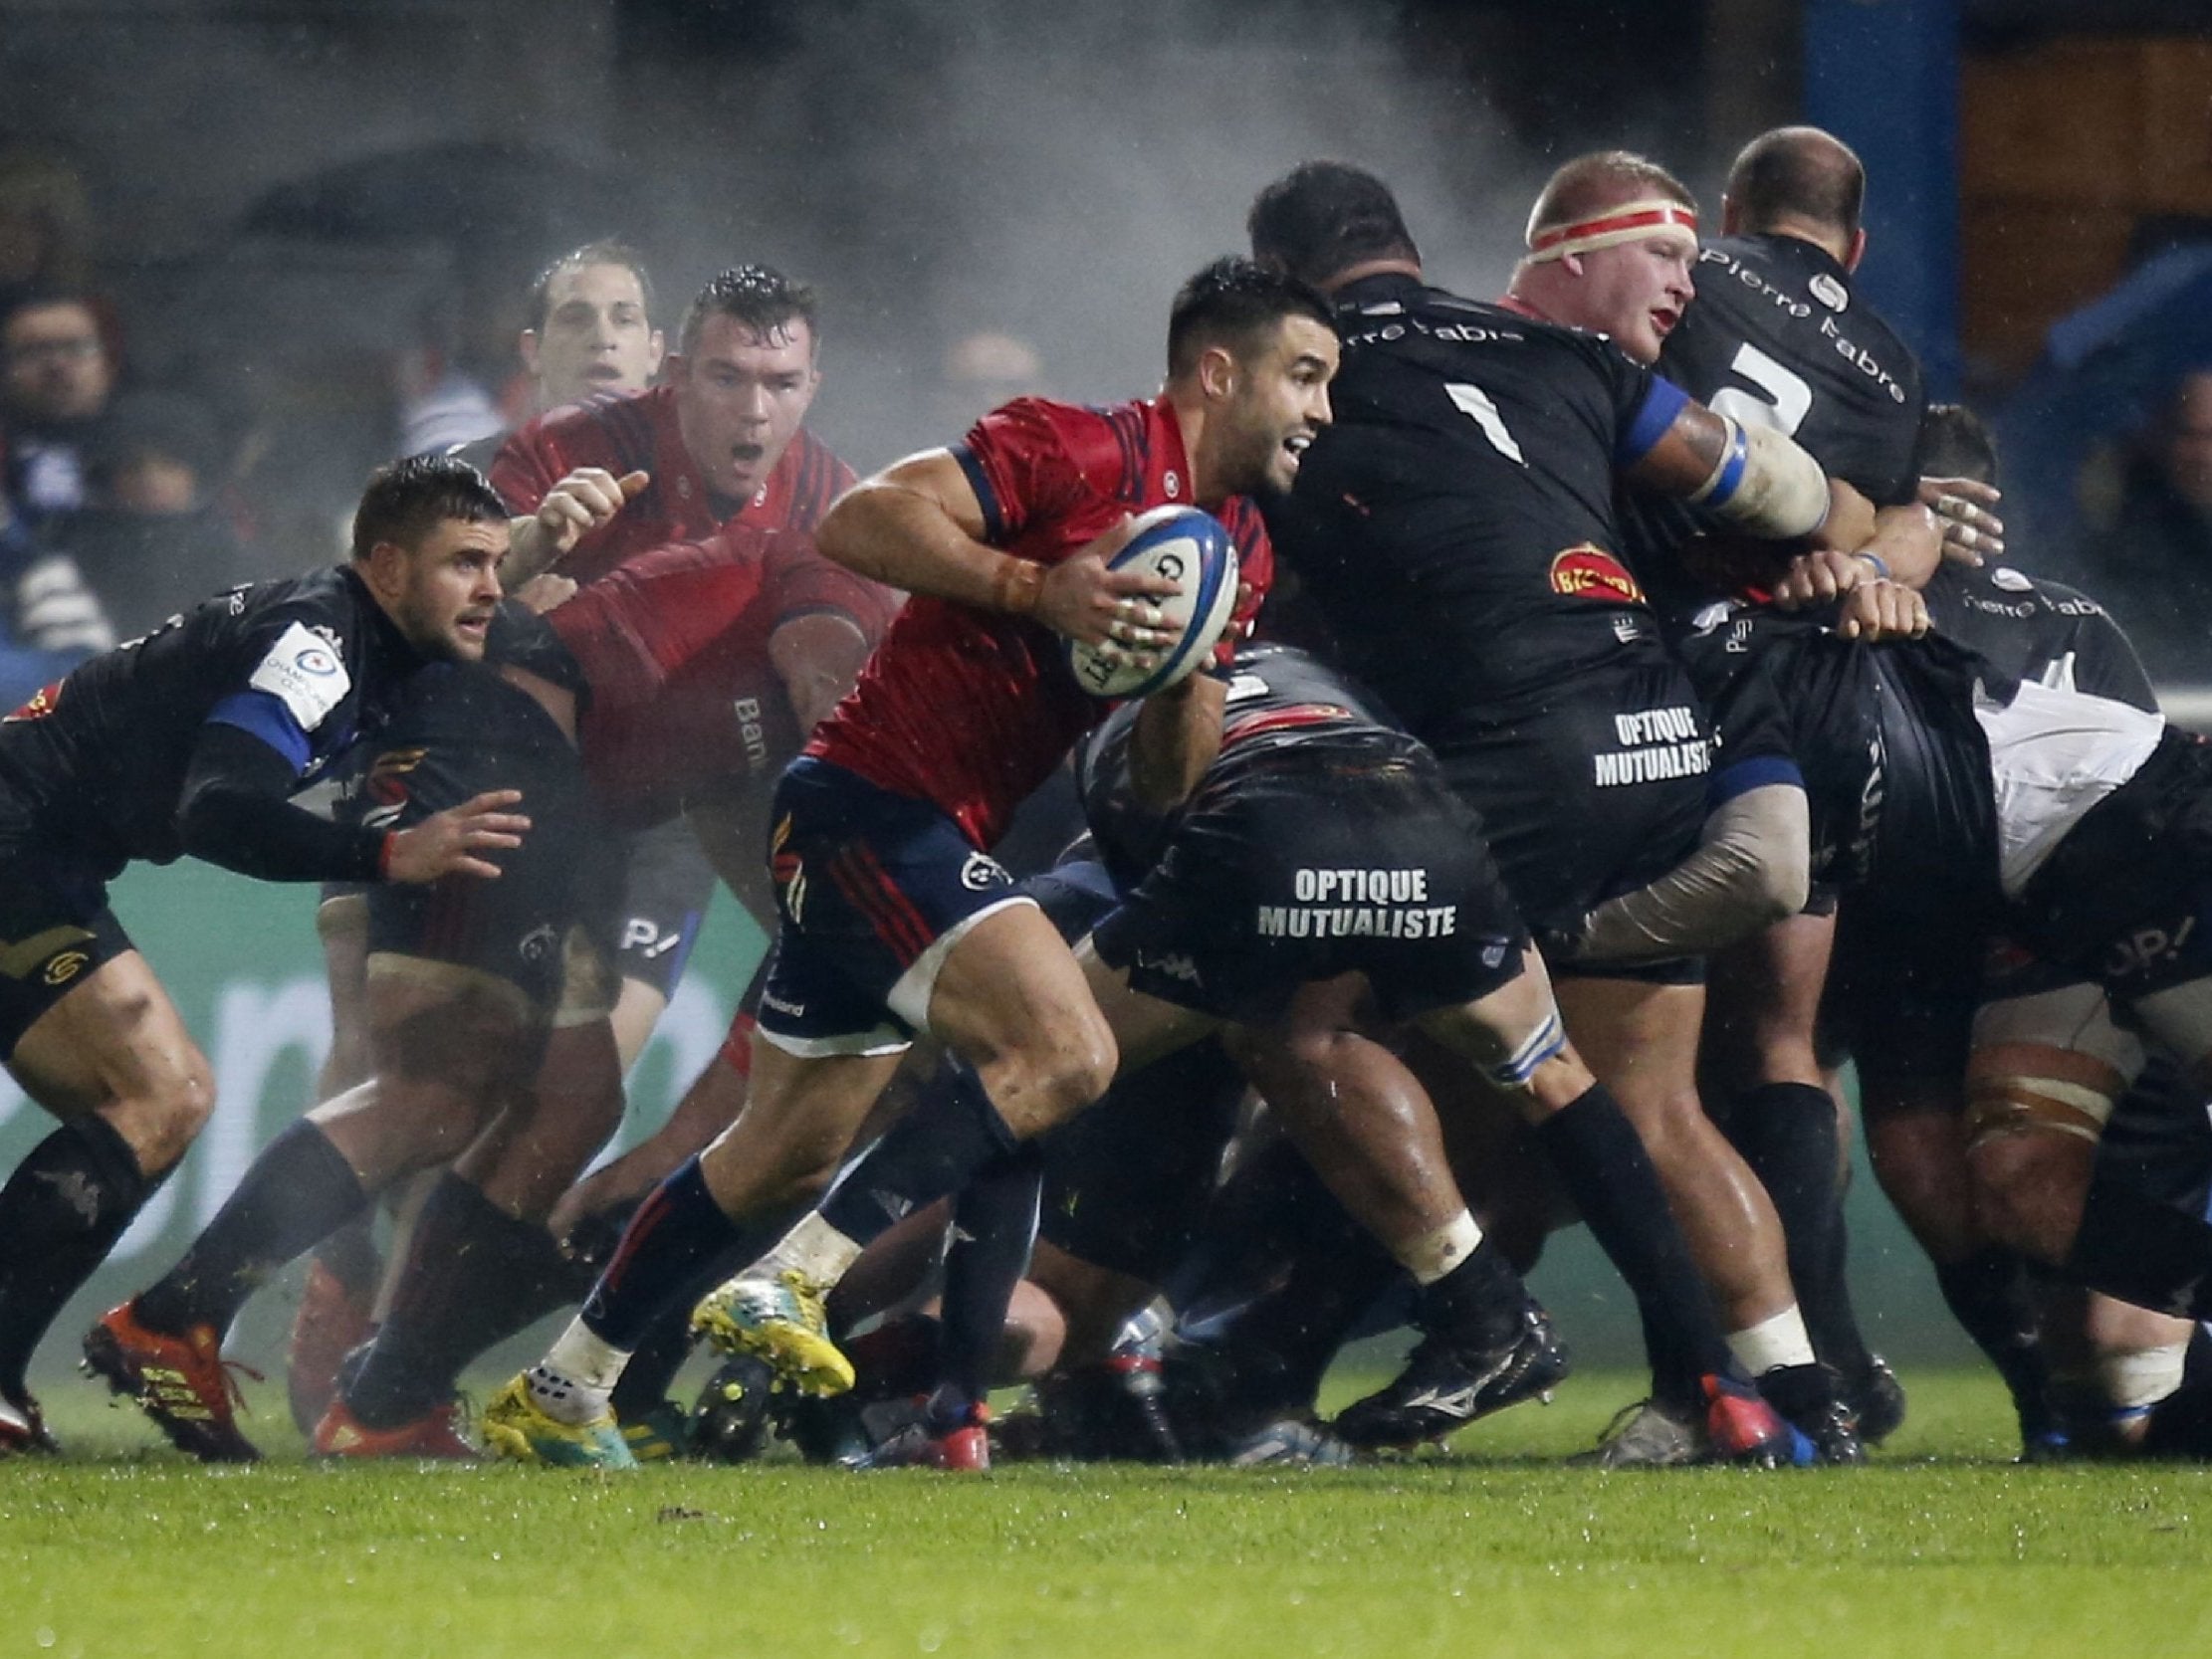 Conor Murray has returned to the Munster side to reclaim his No 9 jersey